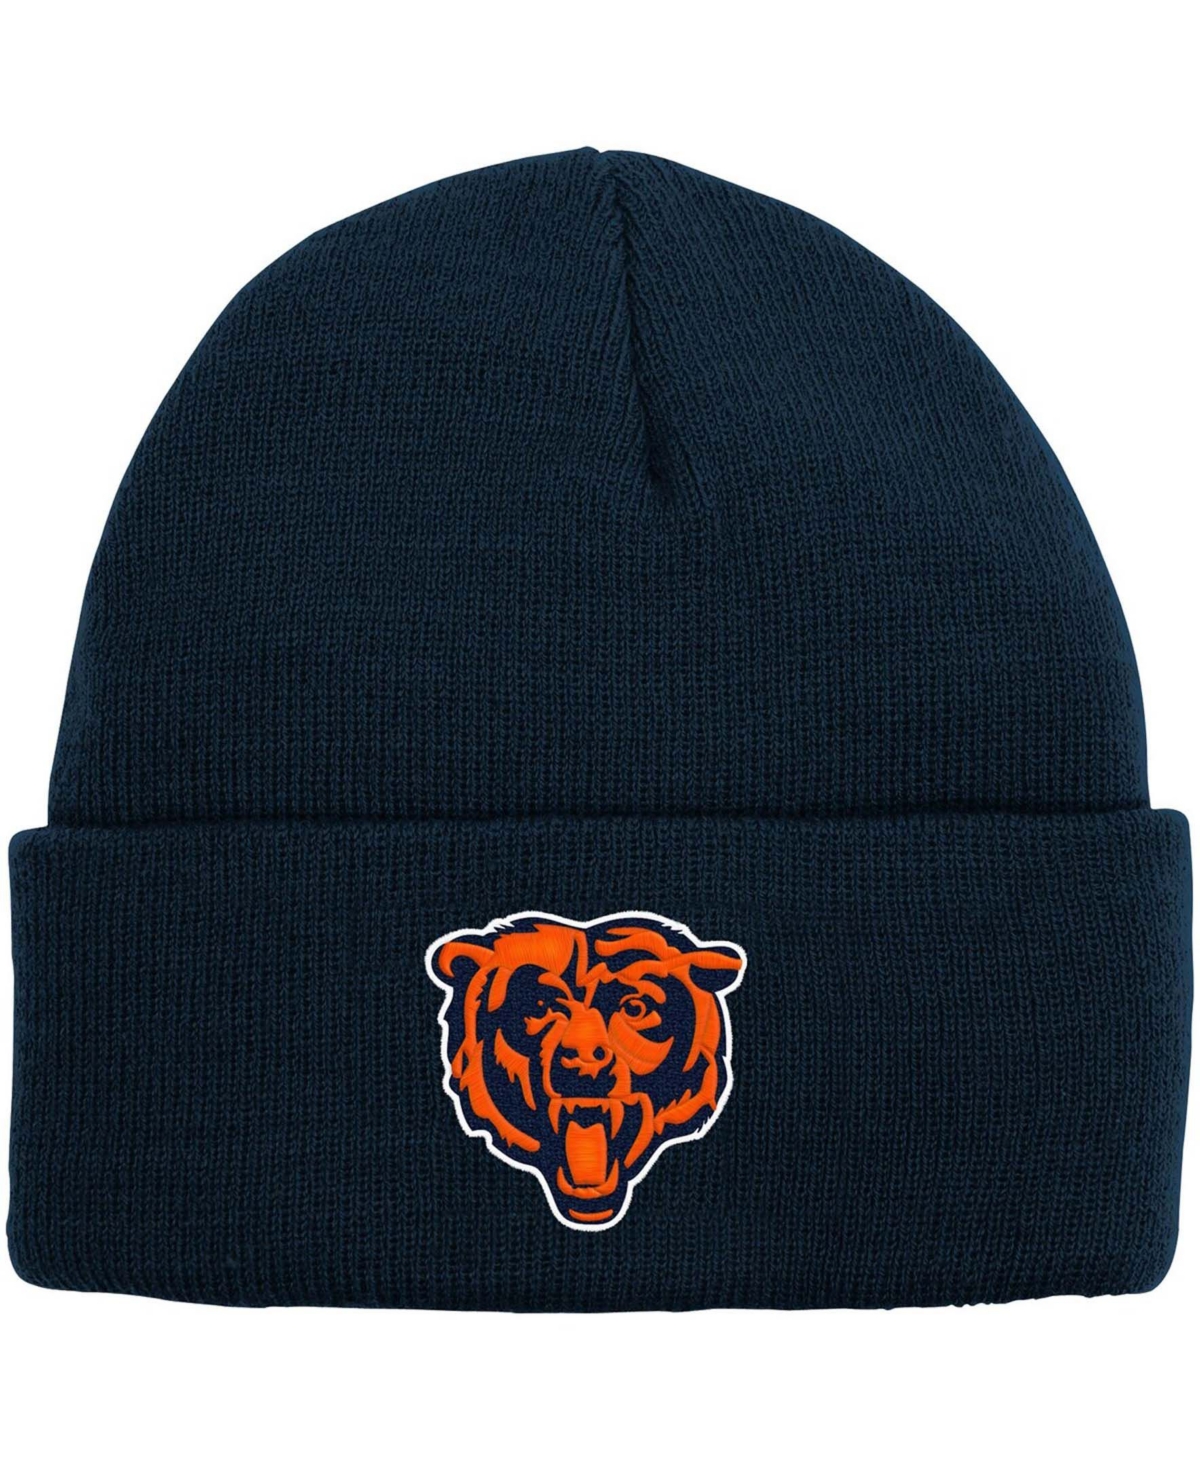 Shop Outerstuff Big Boys And Girls Navy Chicago Bears Basic Cuffed Knit Hat